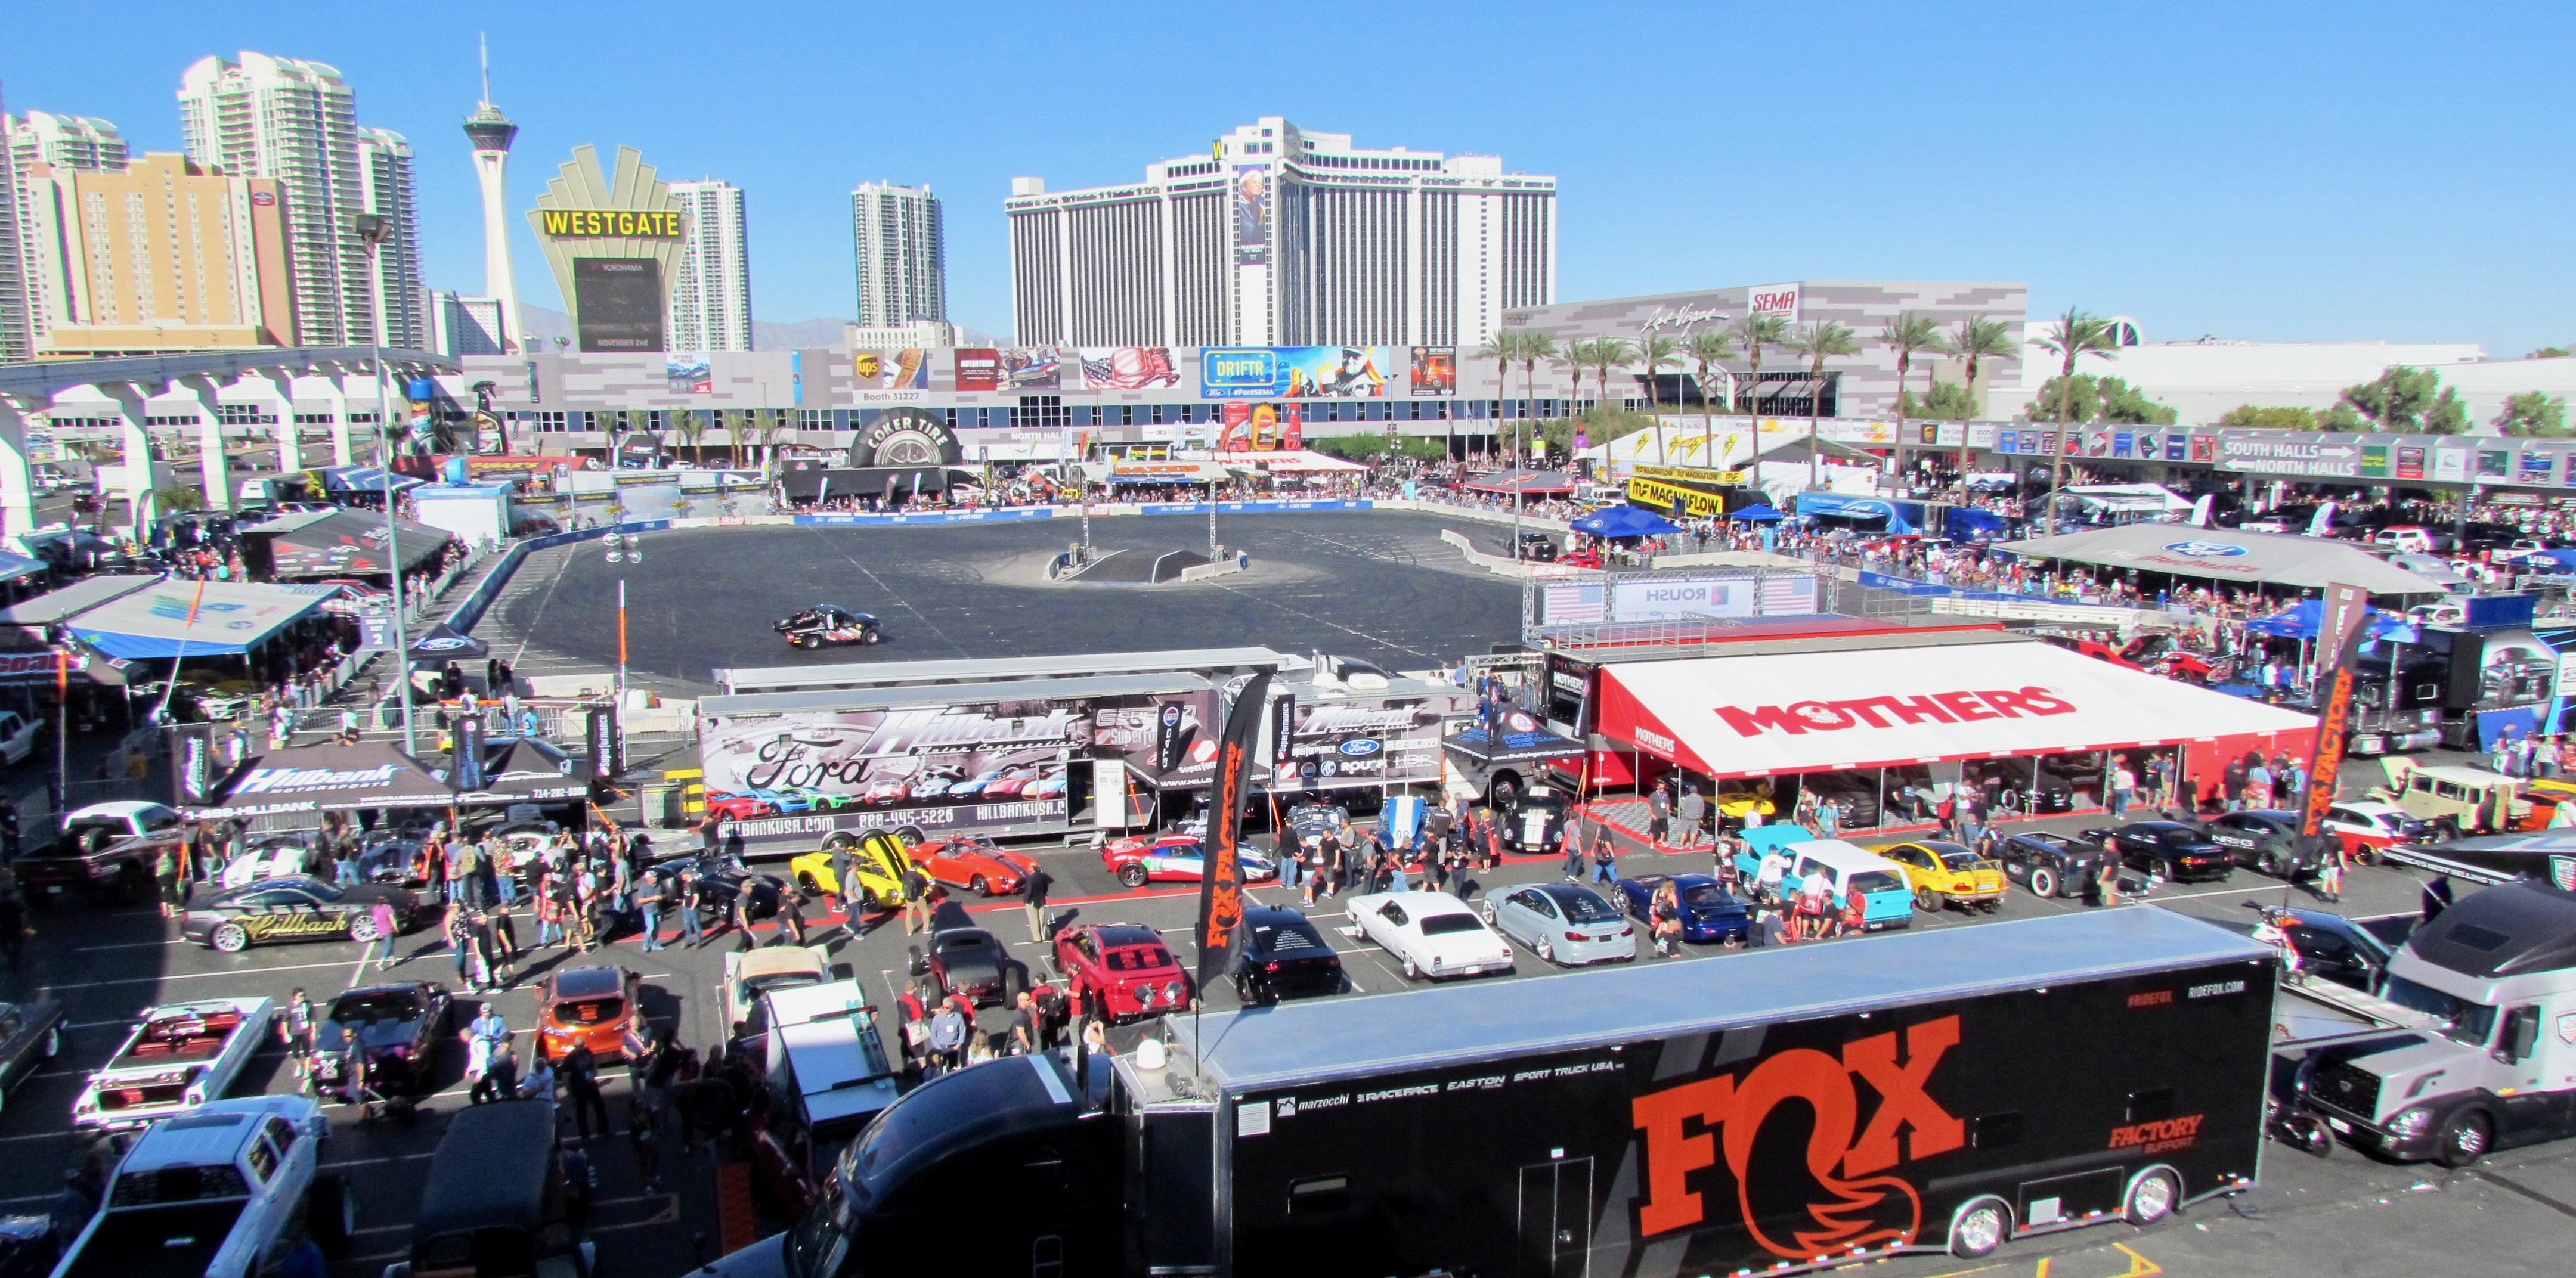 SEMA, SEMA Scene: My almost-marathon meander among some of the coolest cars on the planet, ClassicCars.com Journal